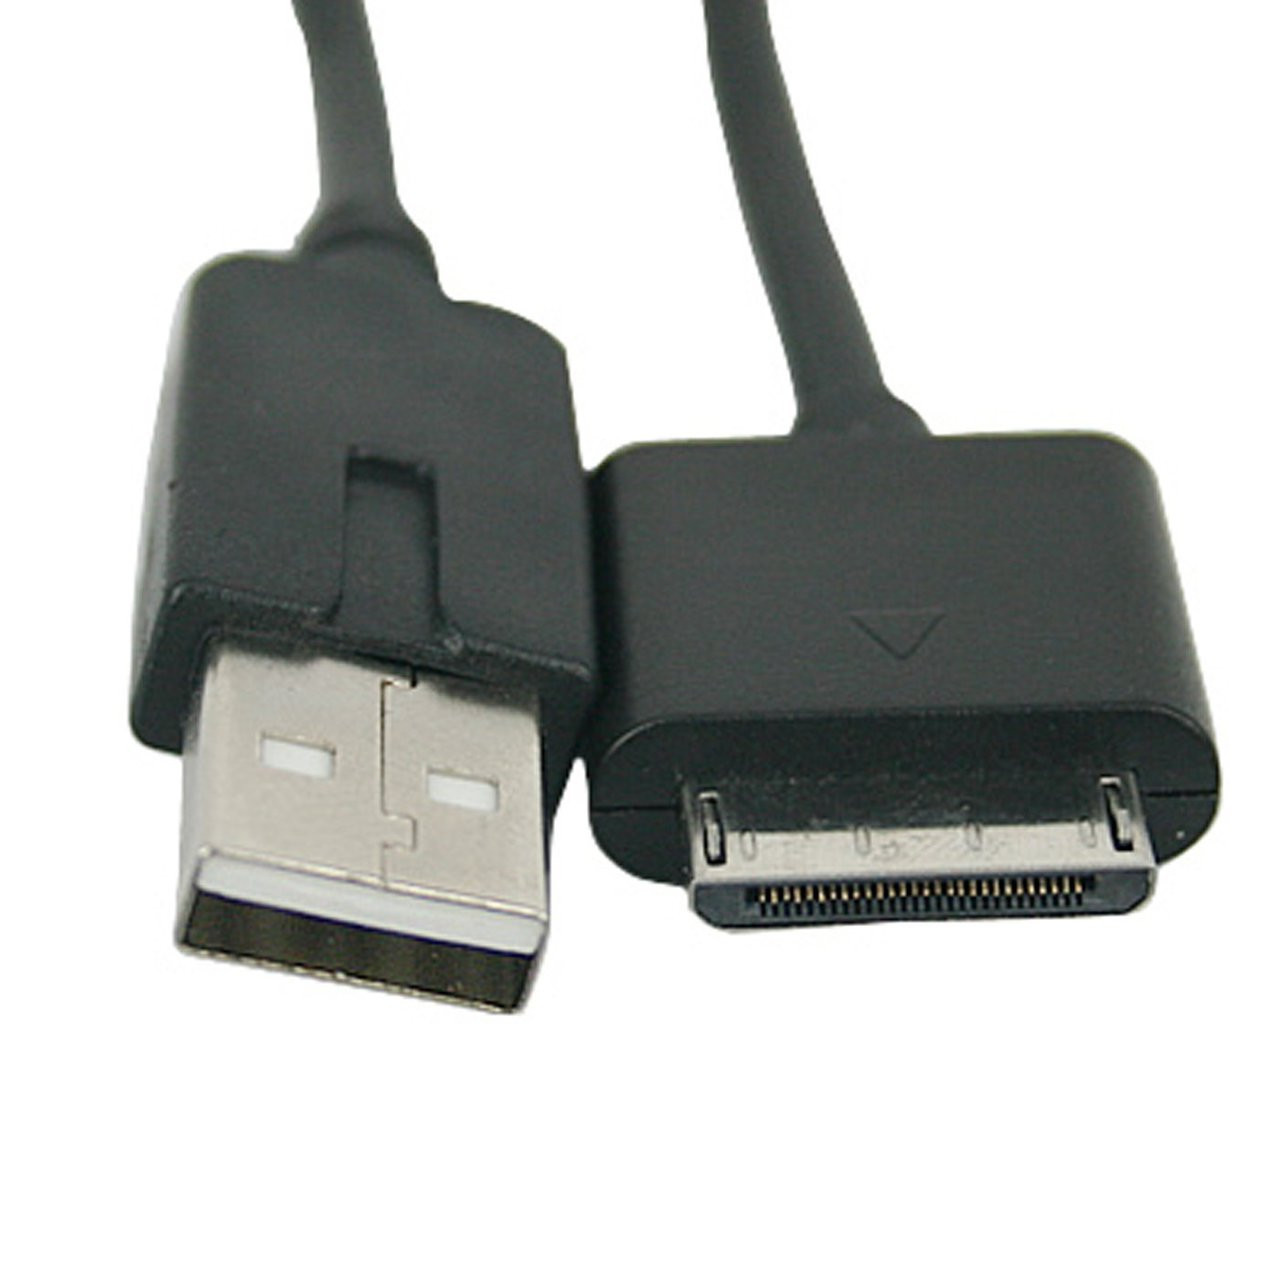 Psp N430 98564 Usb Data Charger Cable For Sony Psp Go